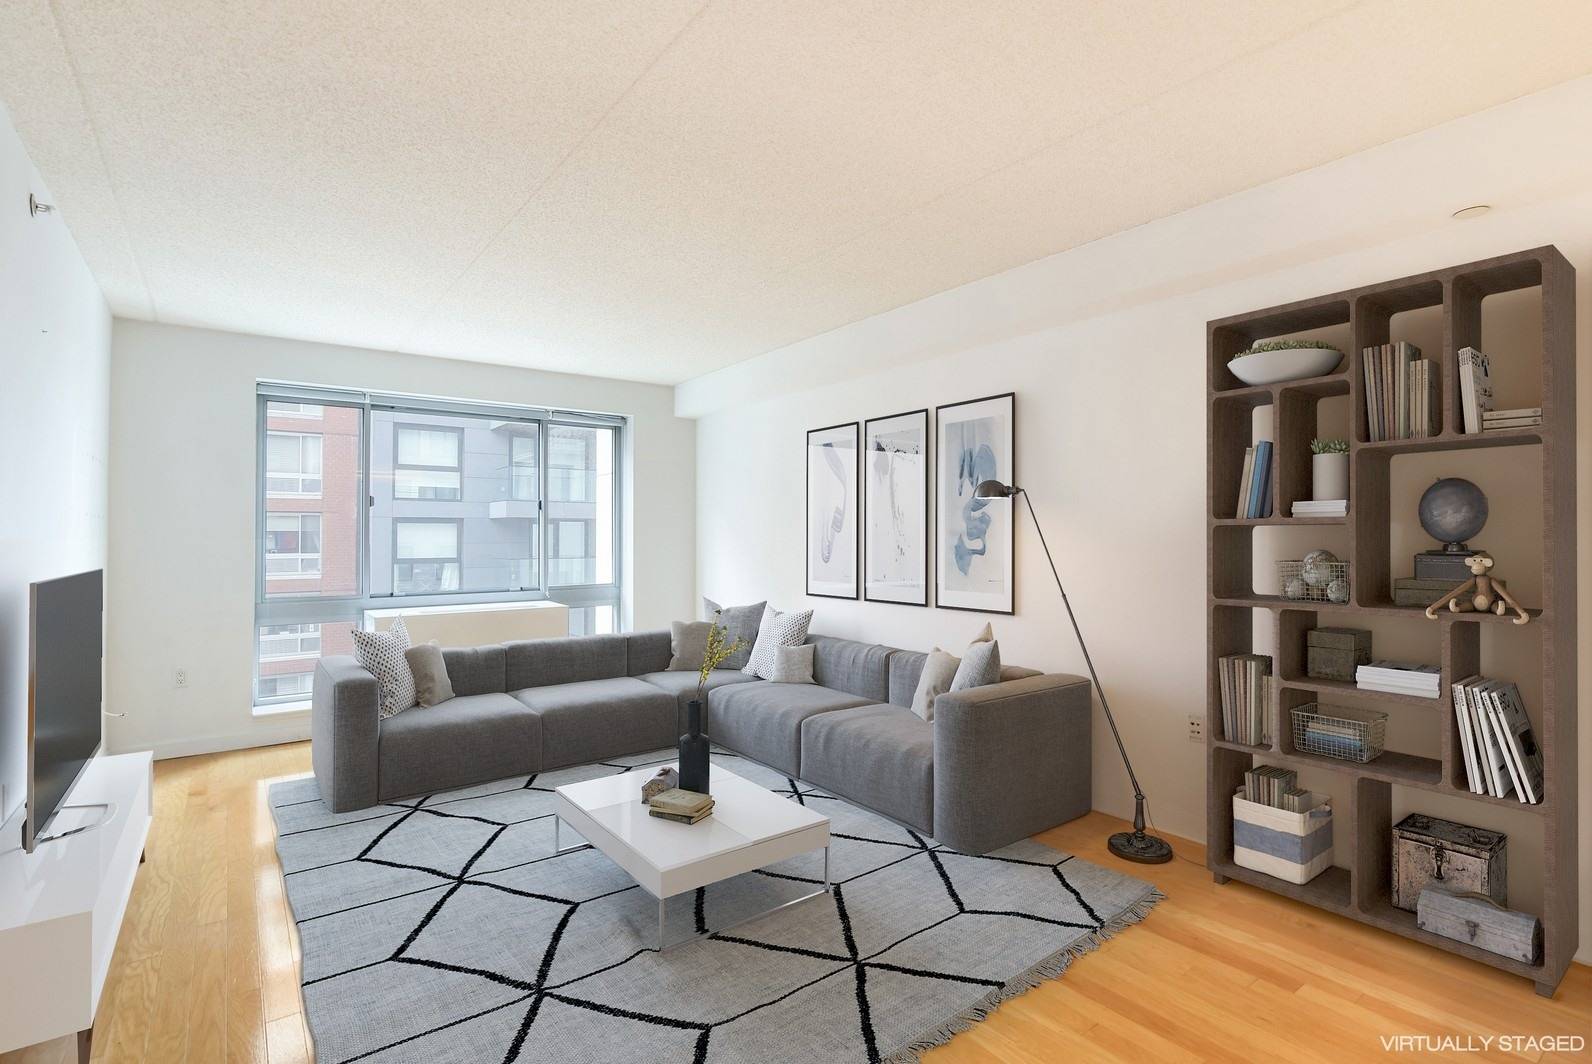 Steps from the High Line, this excellent condition one bedroom condominium pairs a full suite of luxury amenities with an unparalleled location.